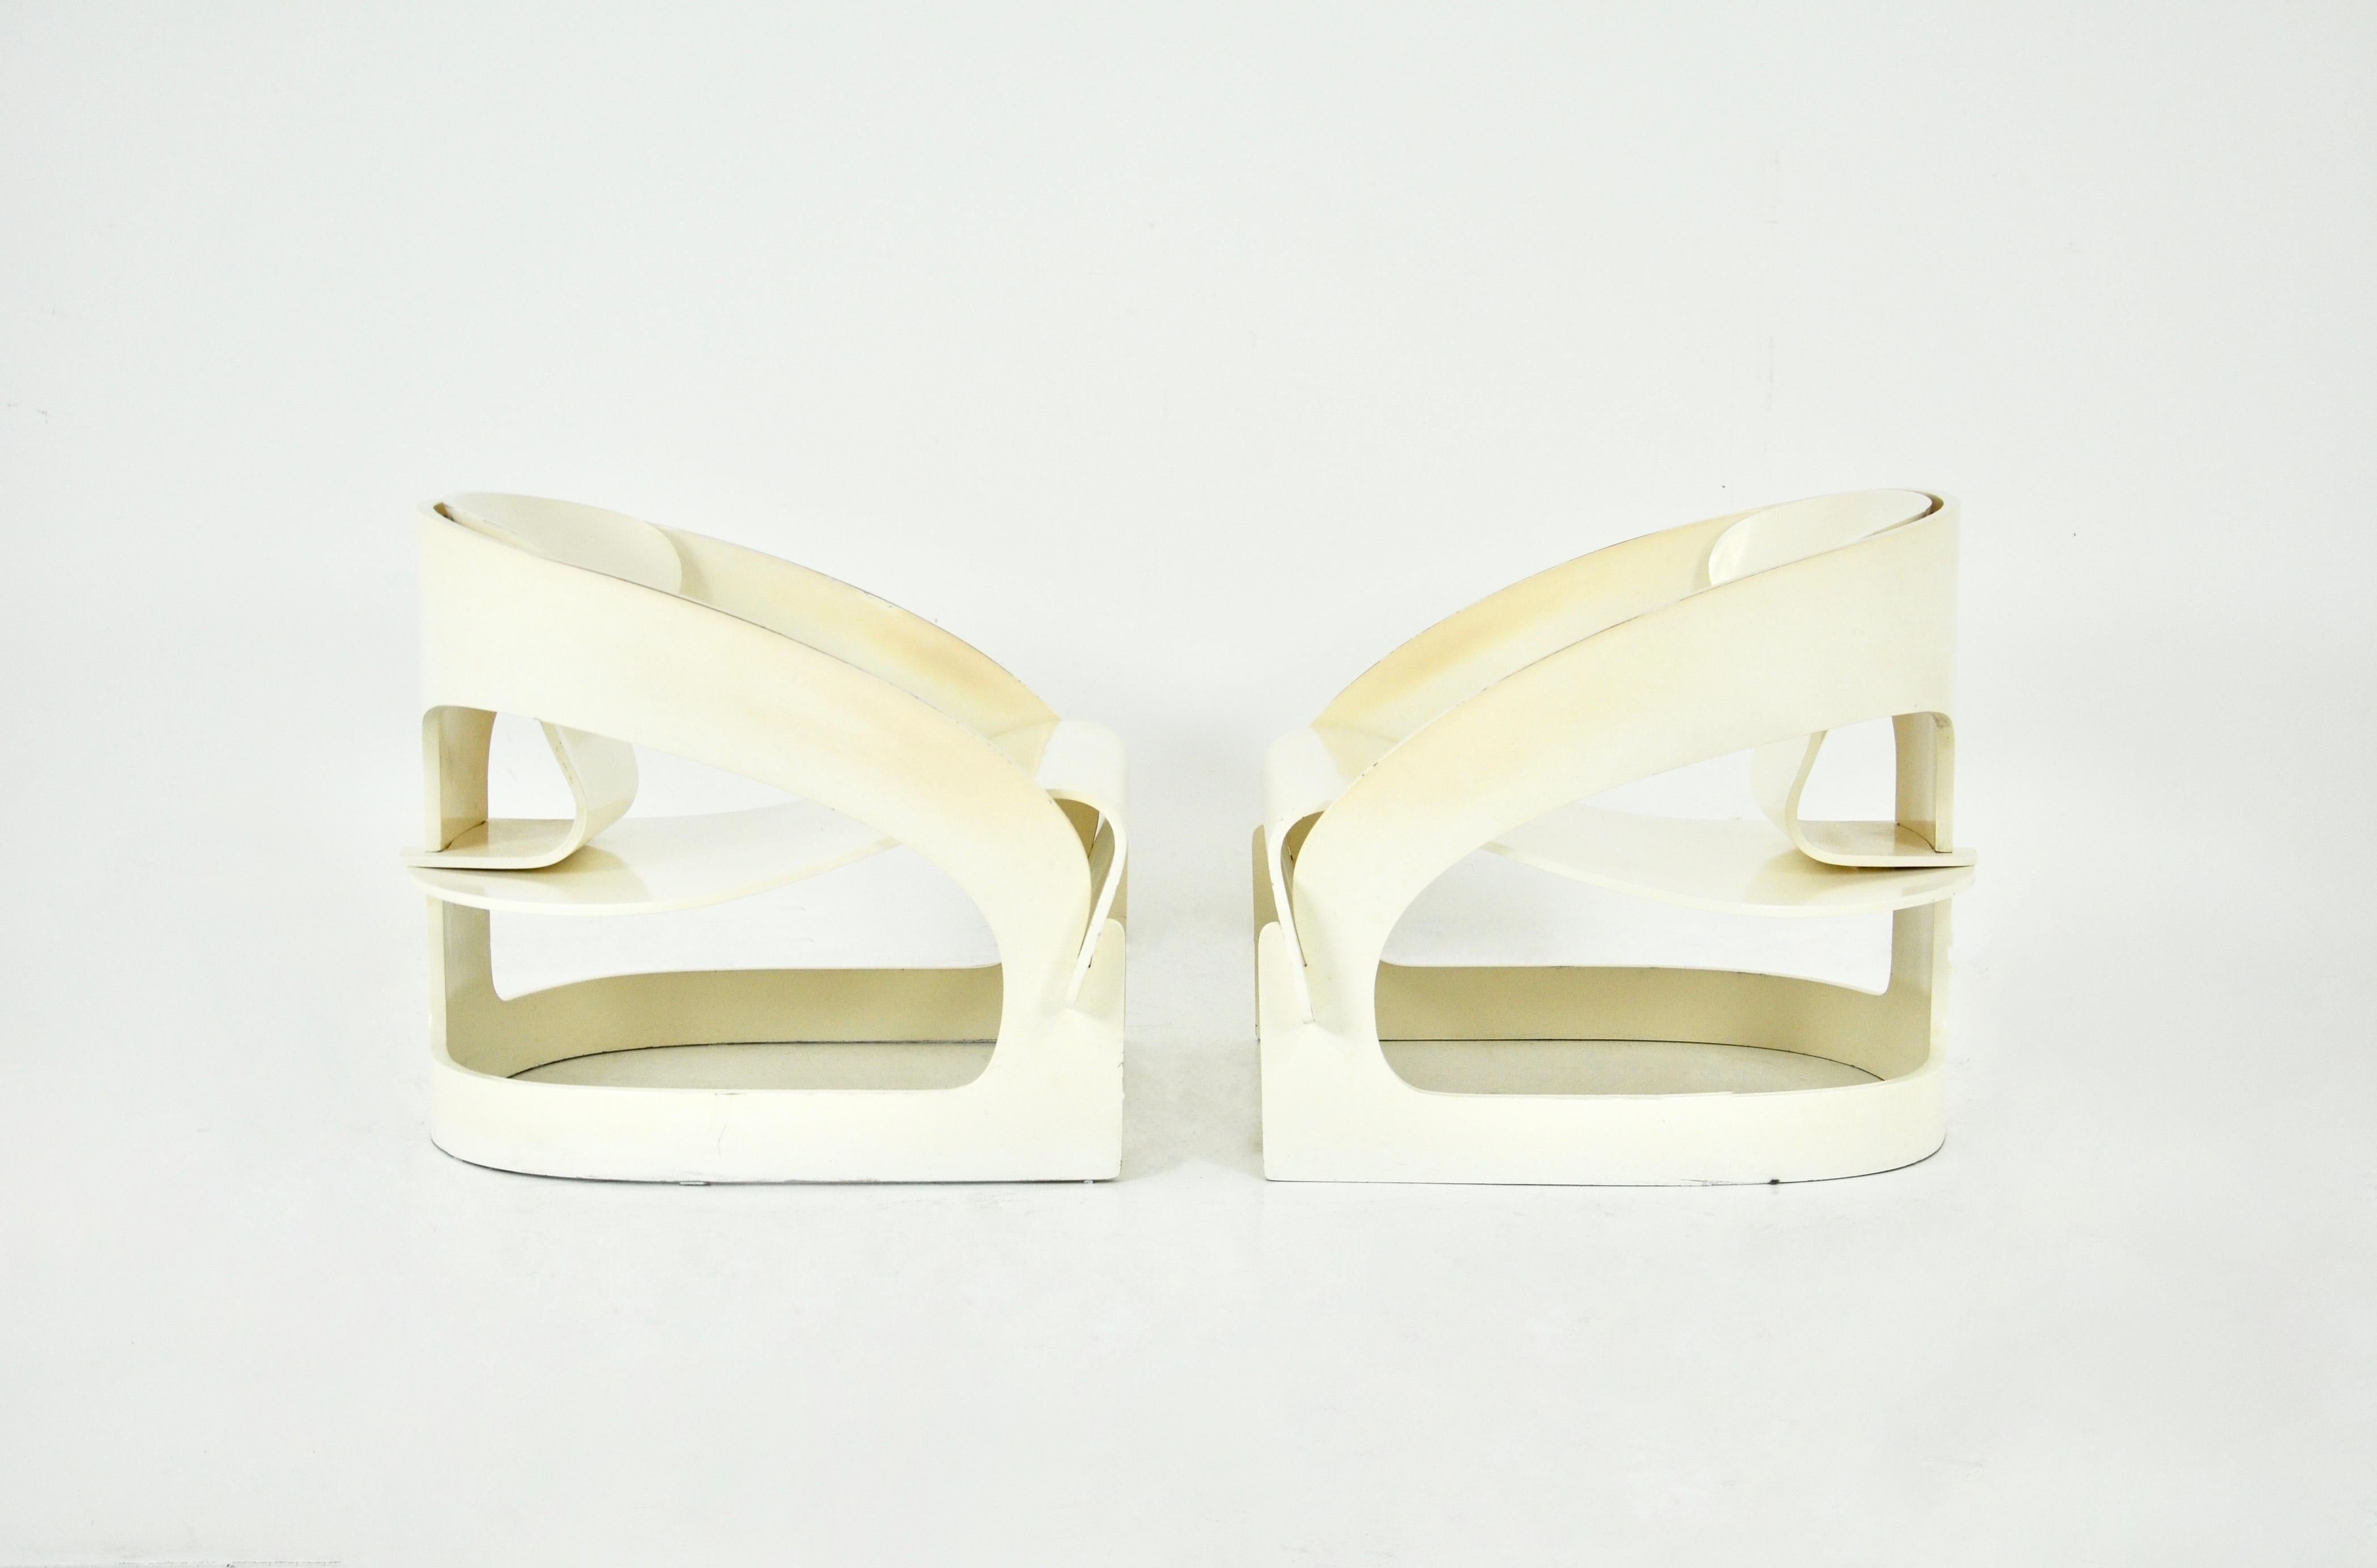 Wood Model 4801 Armchairs by Joe Colombo for Kartell, 1960s, set of 2 For Sale